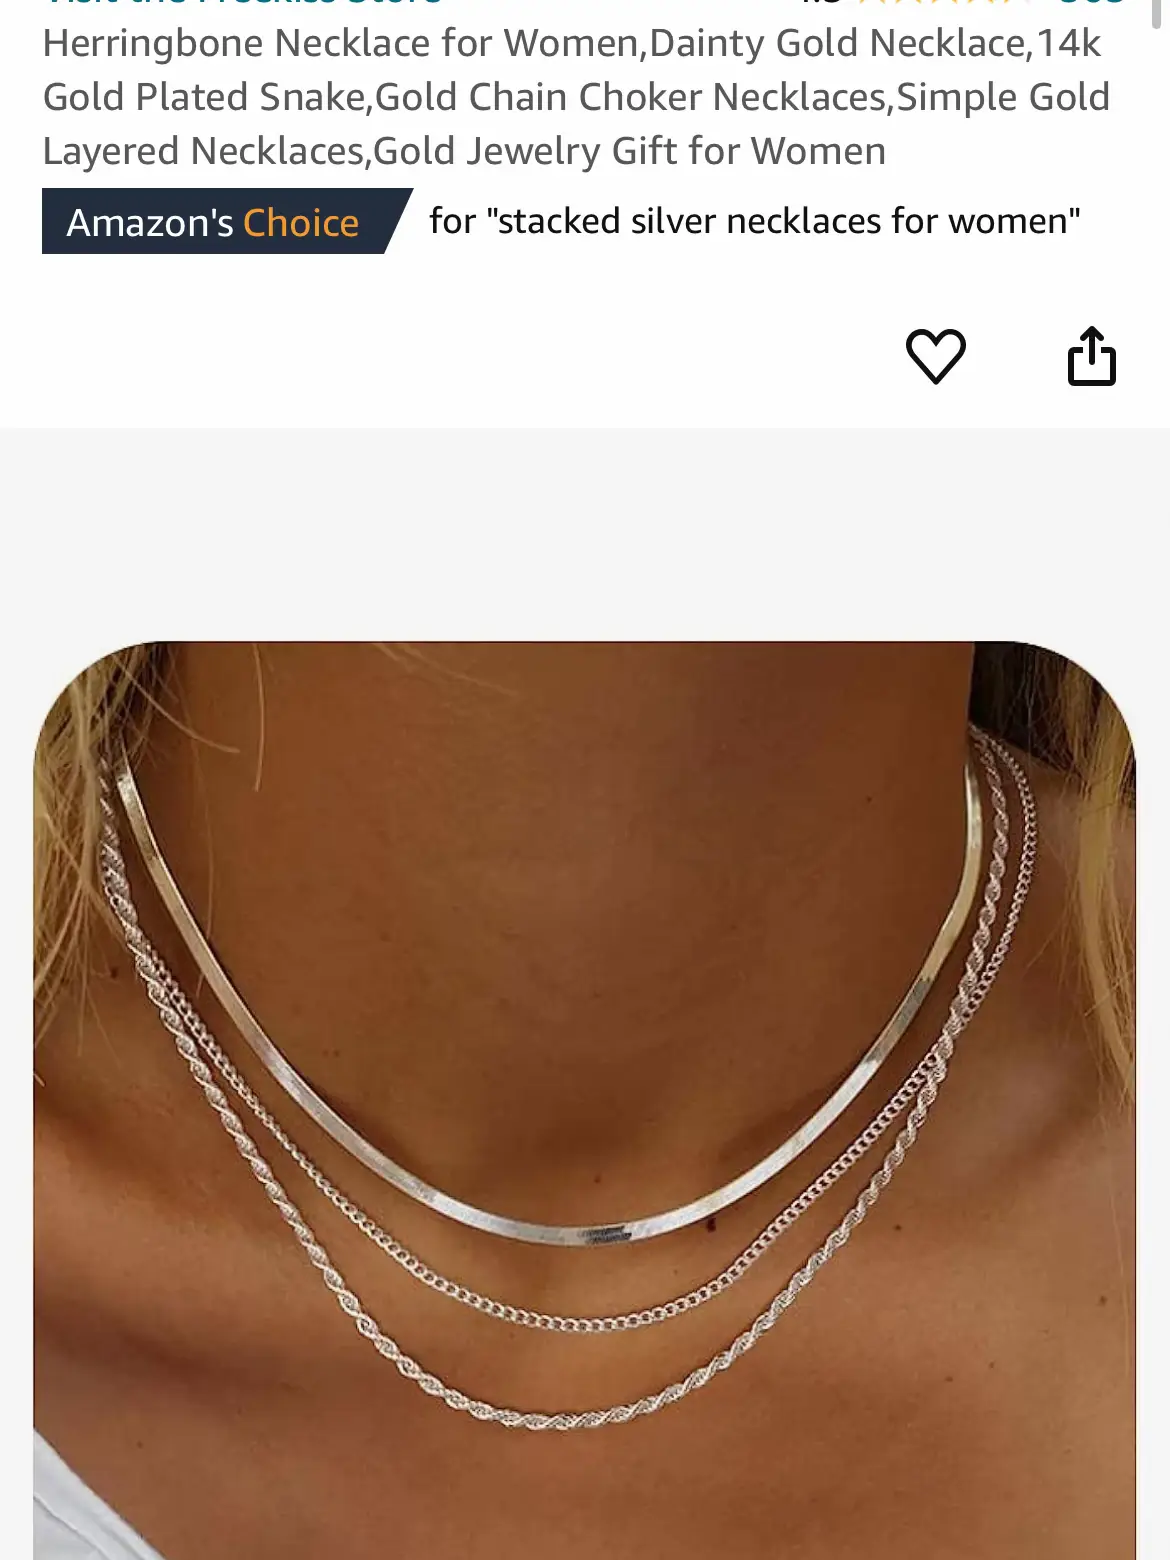  MBW Simple Layered Necklaces for Women, Dainty Silver Plated  Satellite Chain Necklace for Women layering Necklaces Thin Choker Stacked  Necklace Silver Jewelry Set Gift for Women Girls: Clothing, Shoes & Jewelry